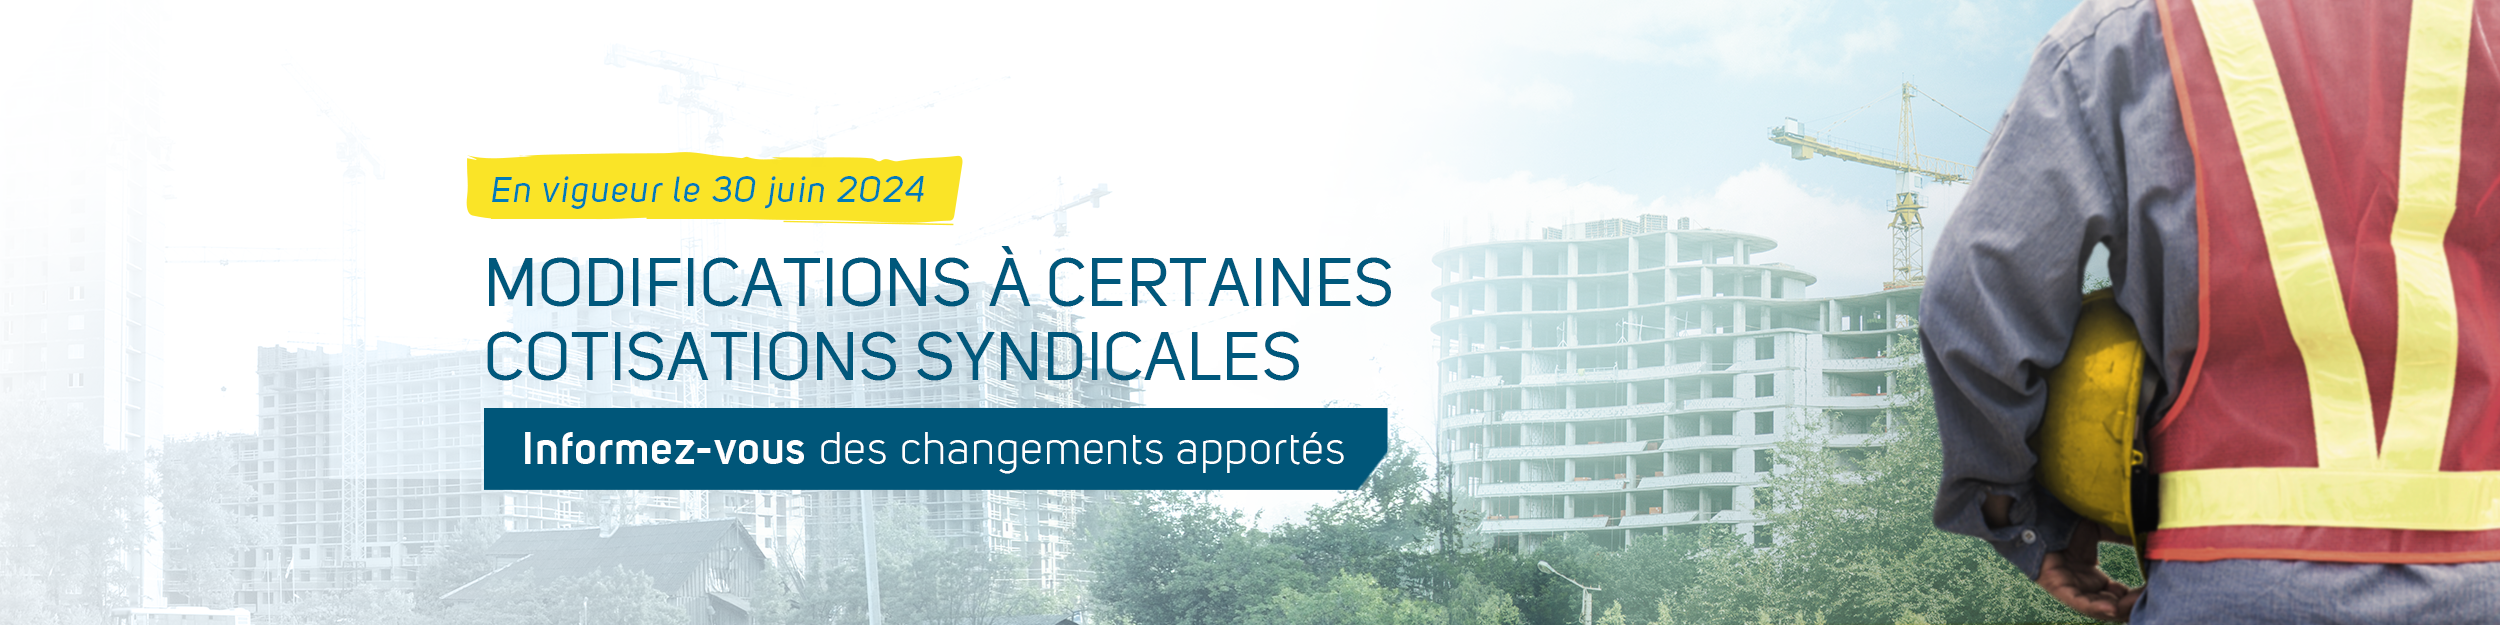 cotisations syndicales